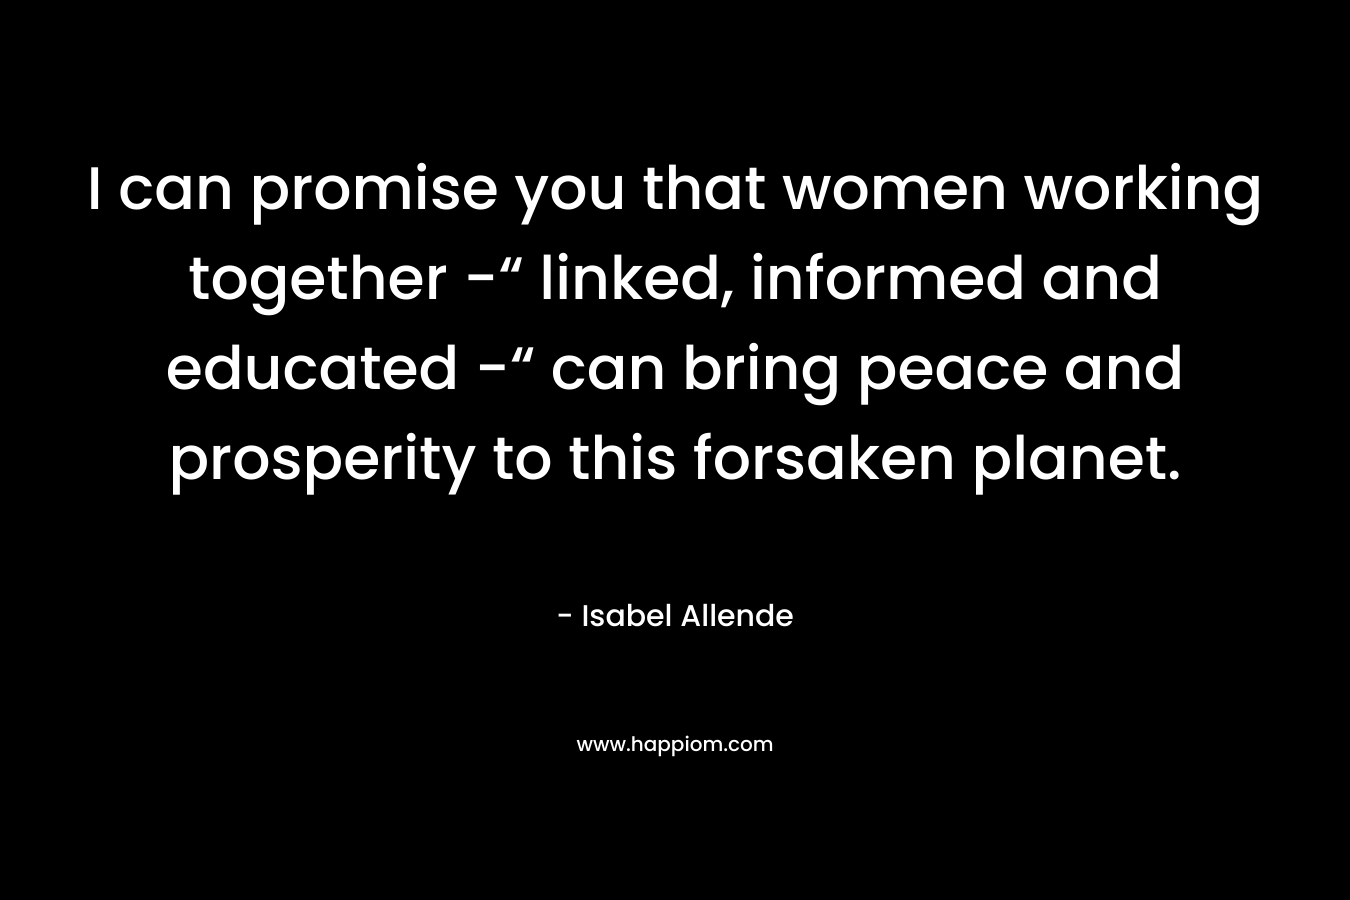 I can promise you that women working together -“ linked, informed and educated -“ can bring peace and prosperity to this forsaken planet. – Isabel Allende